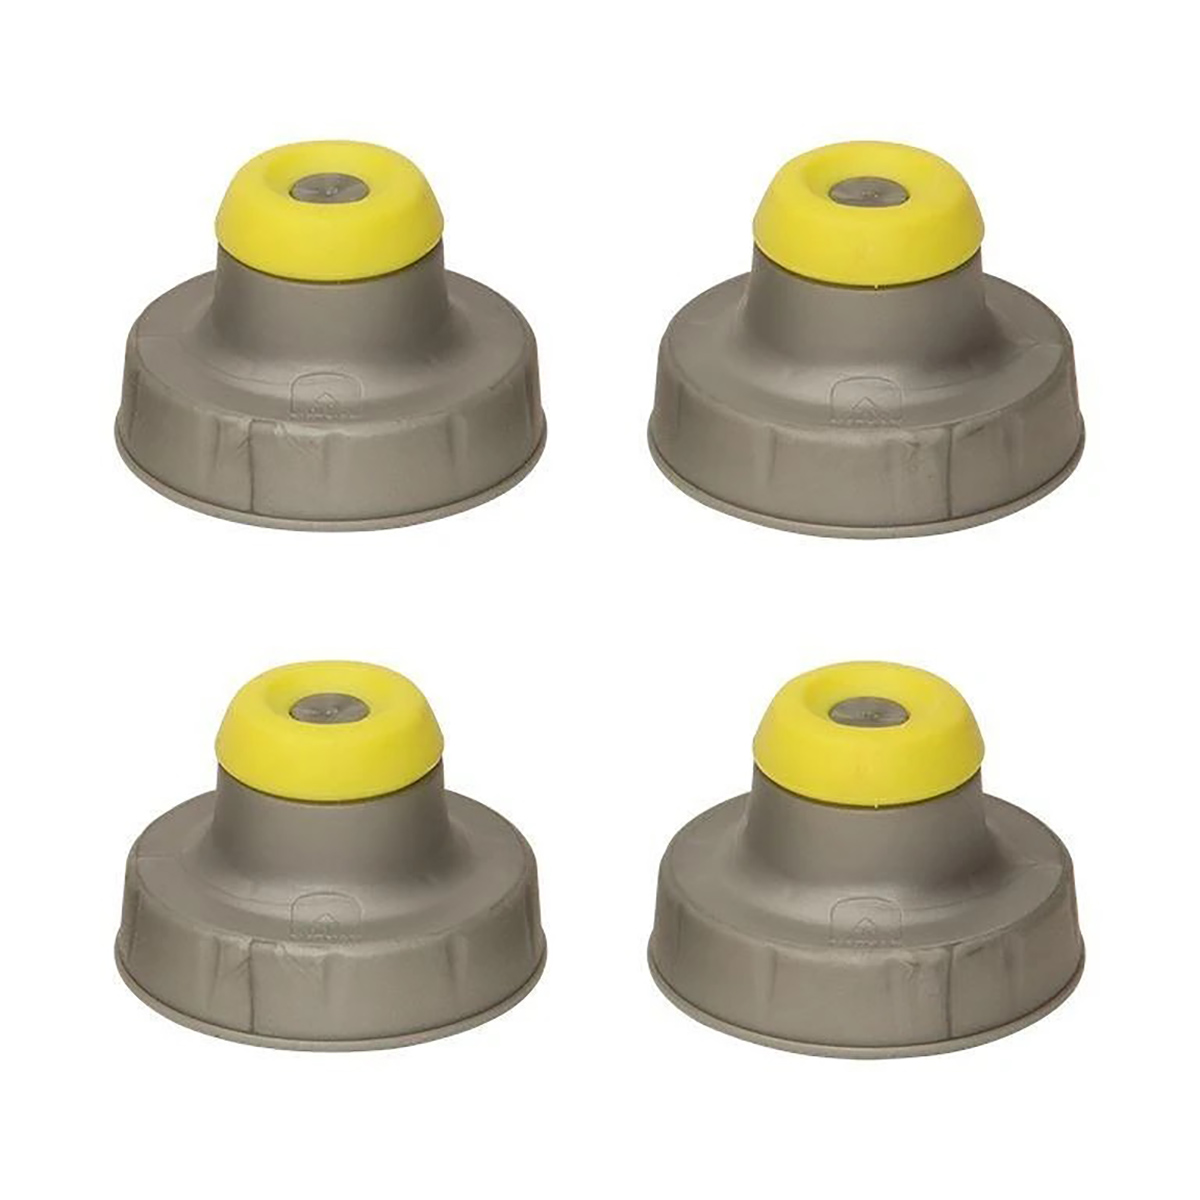 Nathan 4pk Push-pull caps, , large image number null